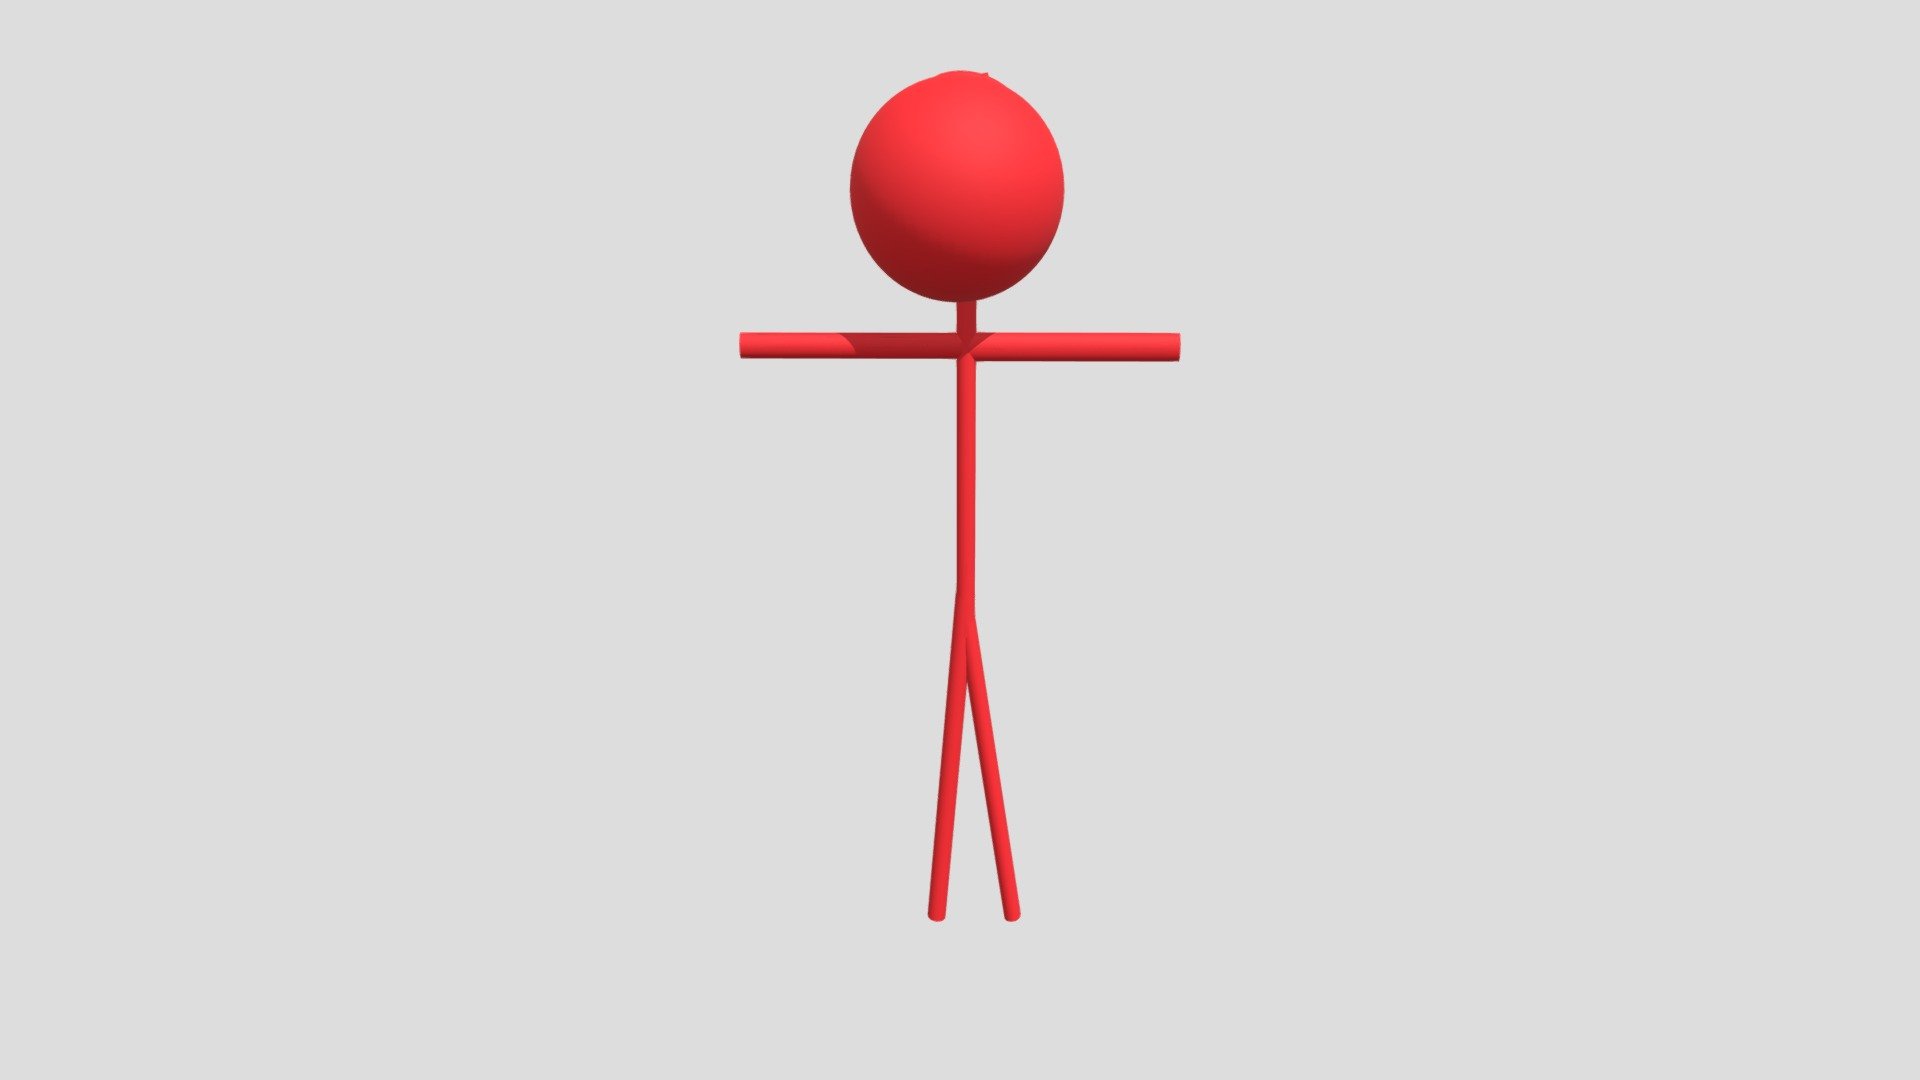 Red (Animator VS Animation) - Download Free 3D model by 100 Ways to Win  (@100-Ways-to-Win) [8b30272]